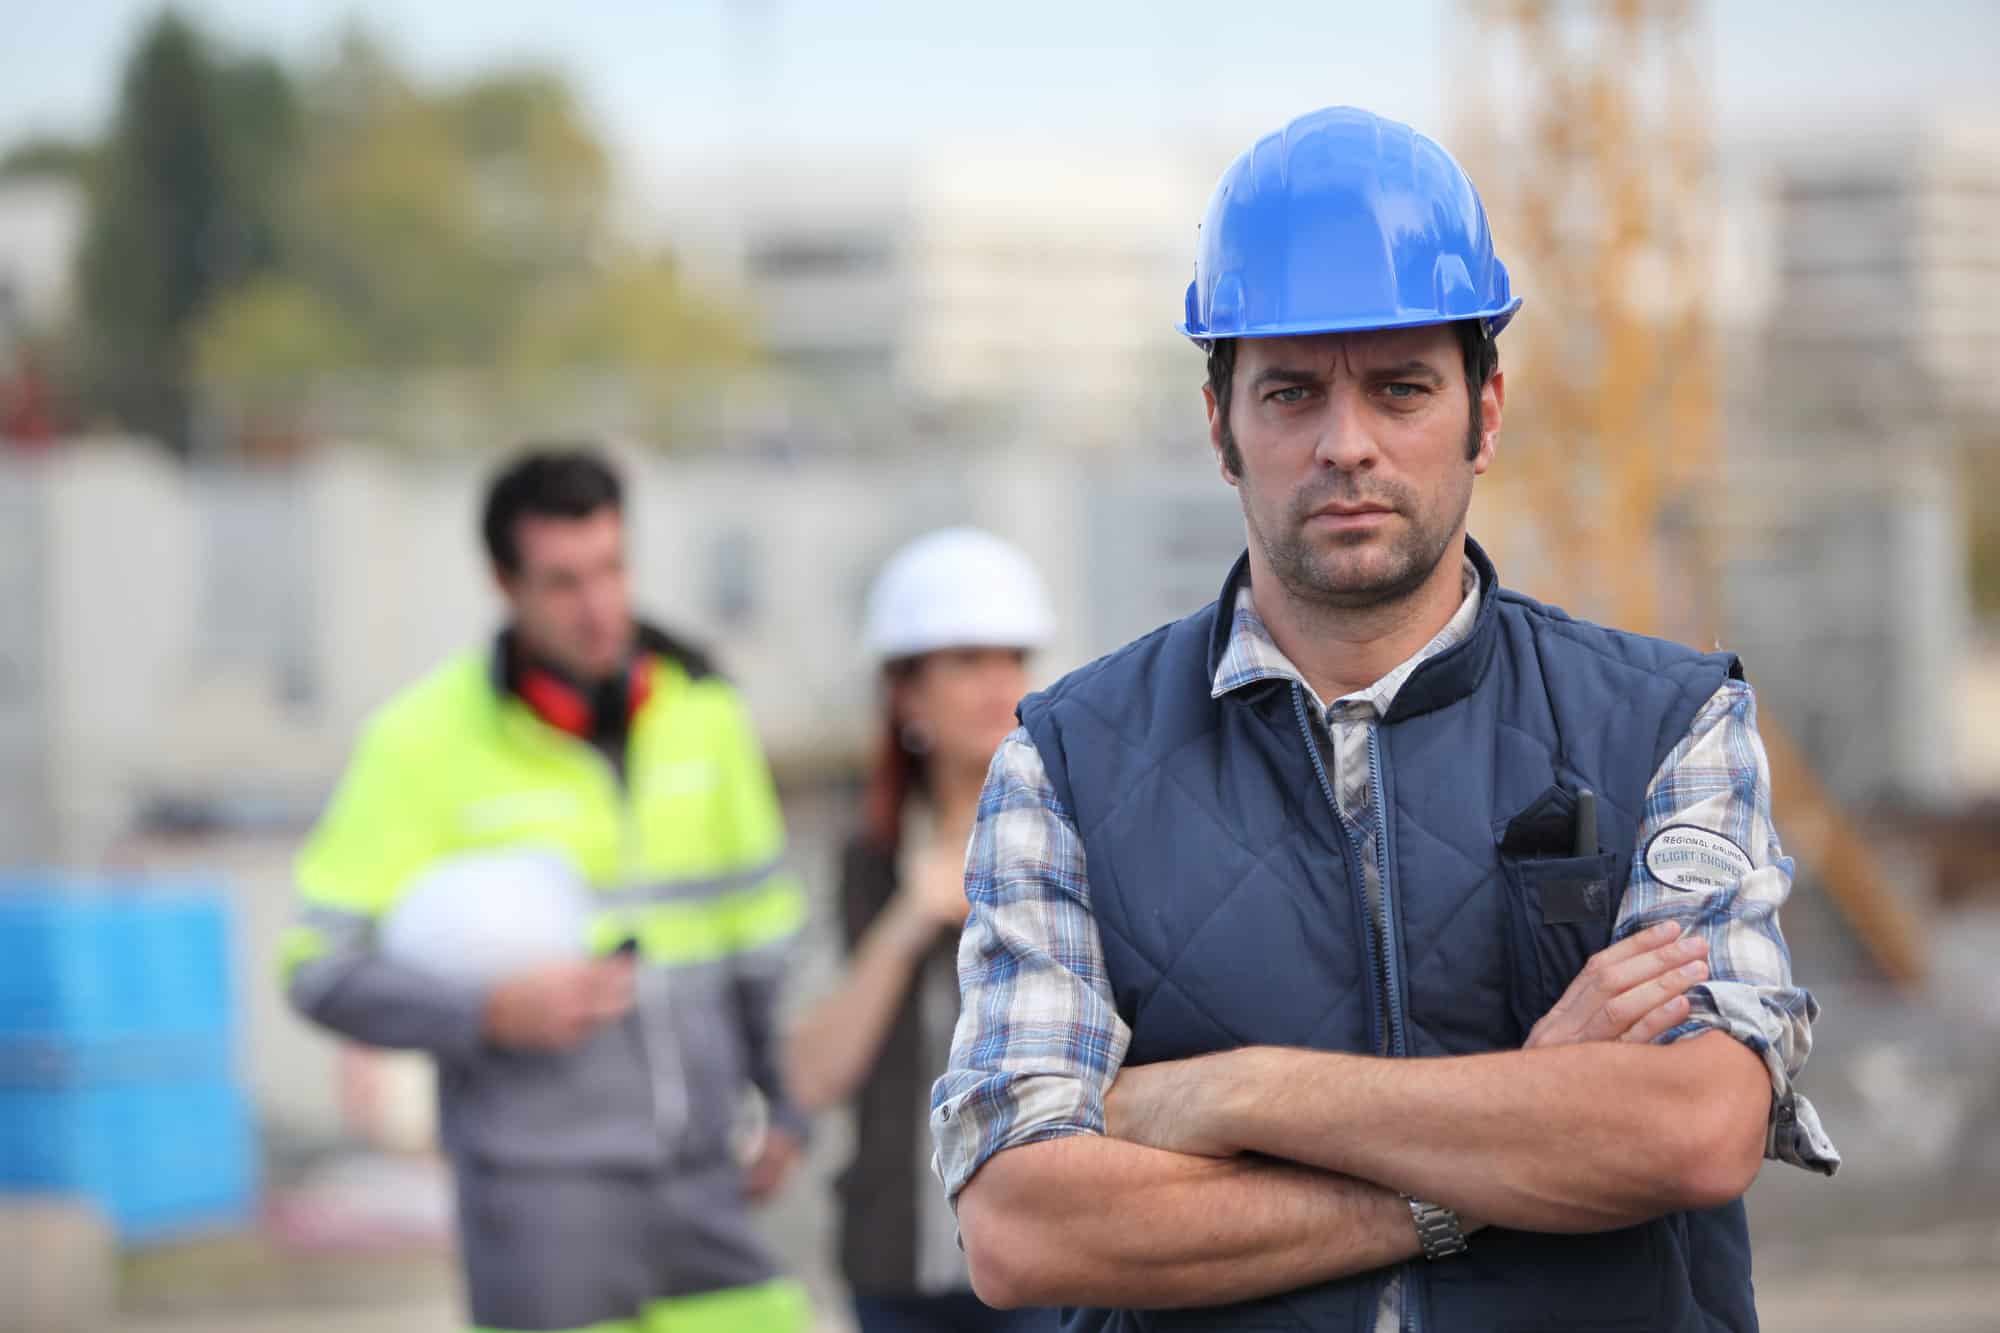 Electrician with folded arms and blue hard hat. Two electricians in background.